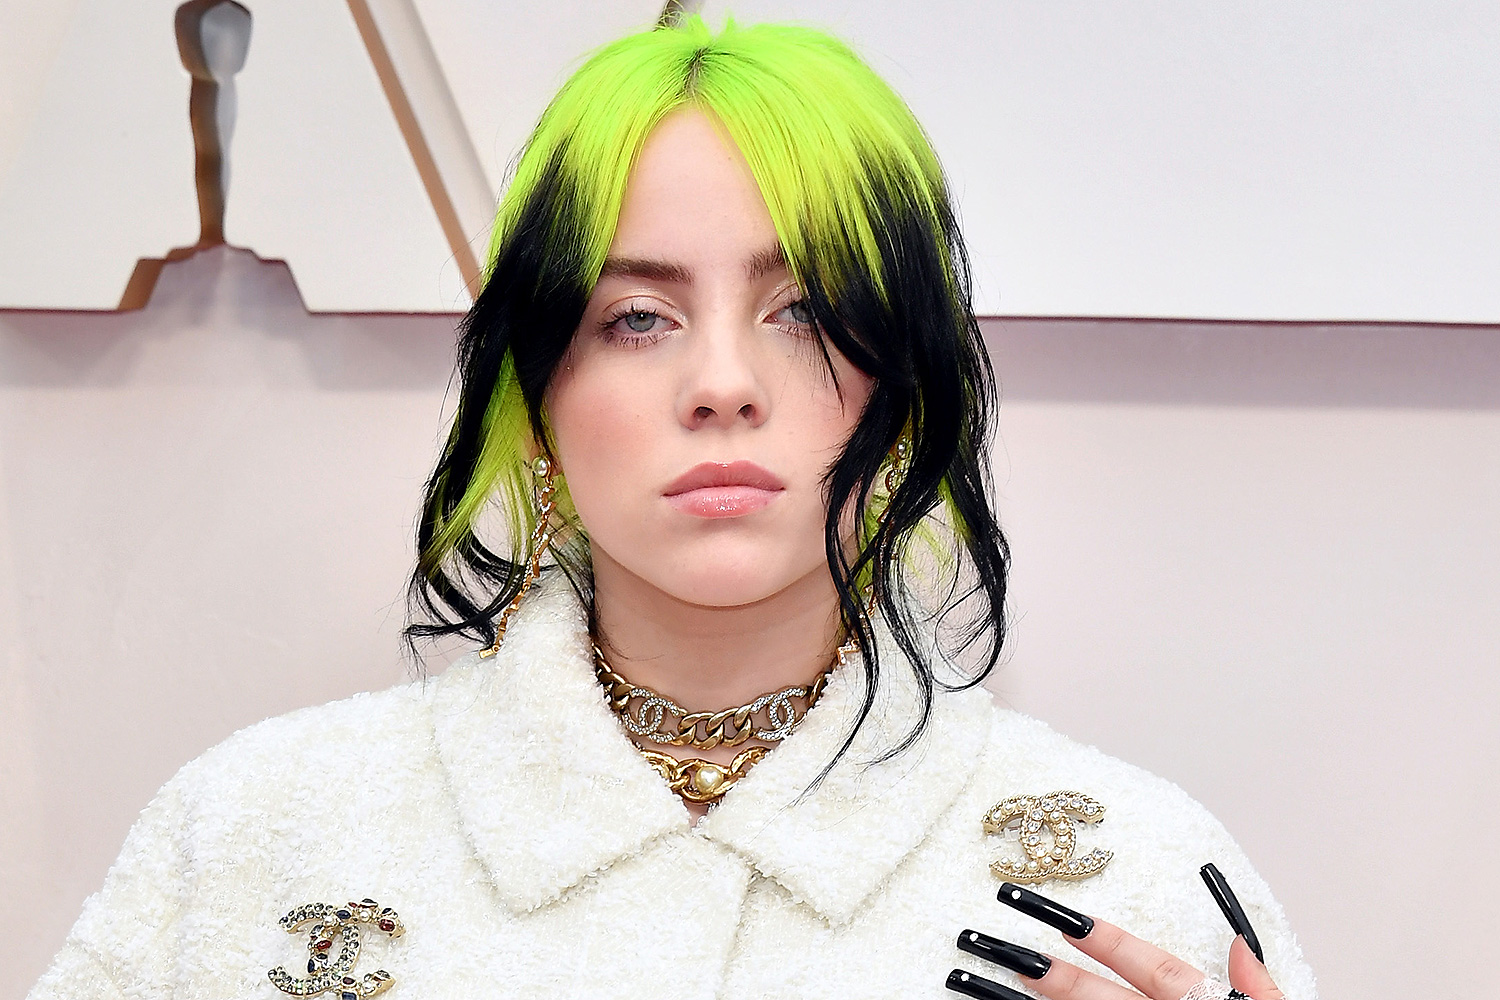 Billie Eilish Dyes Her Hair Blonde and Fans Are Freaking Out - wide 9